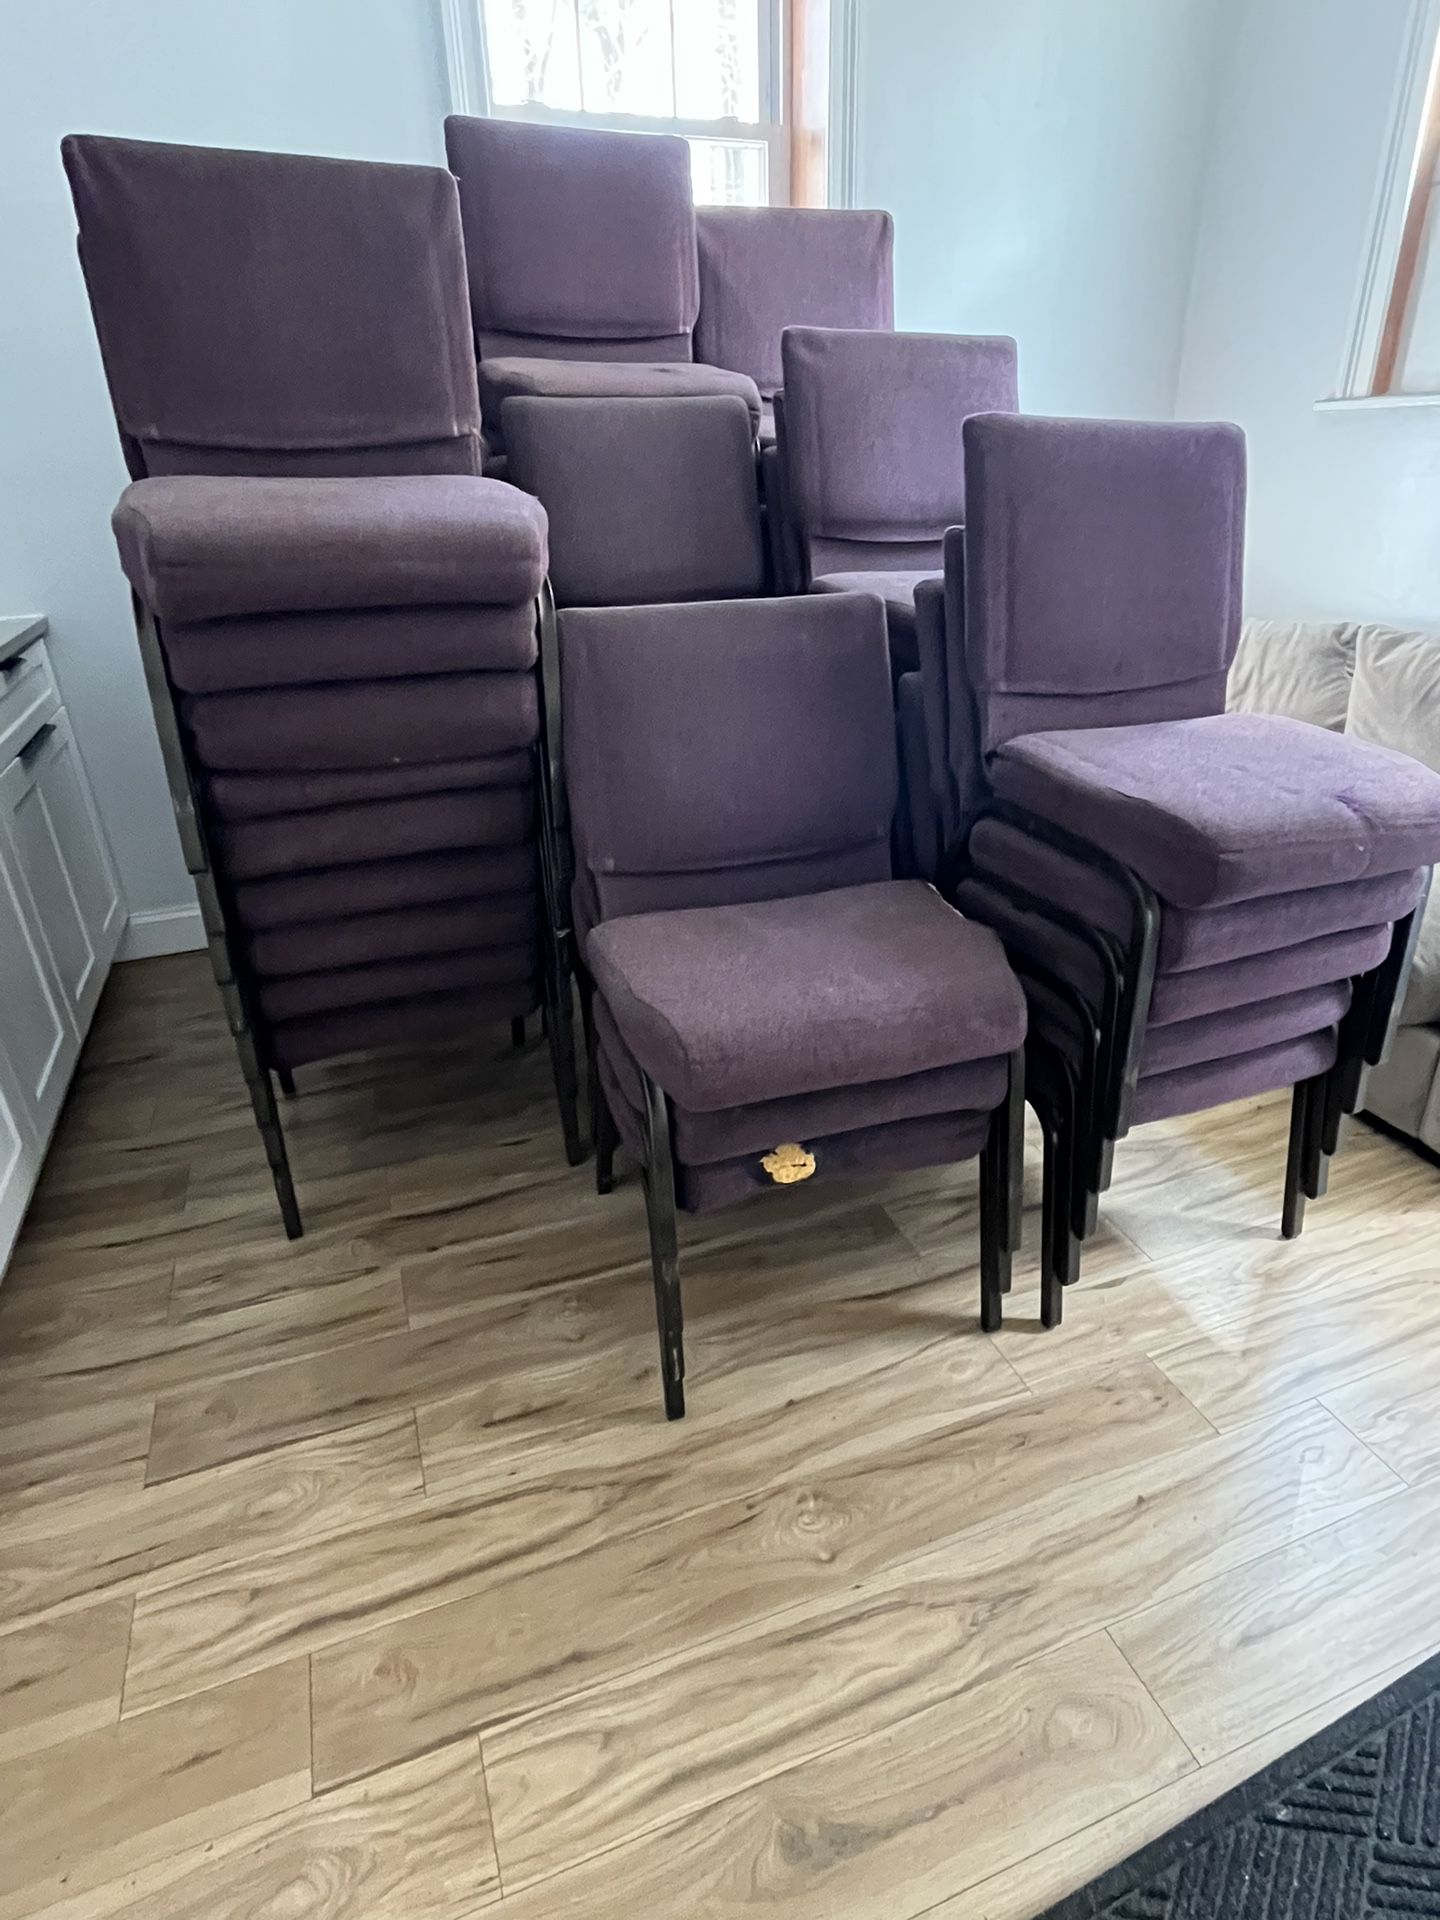 Used Chairs 